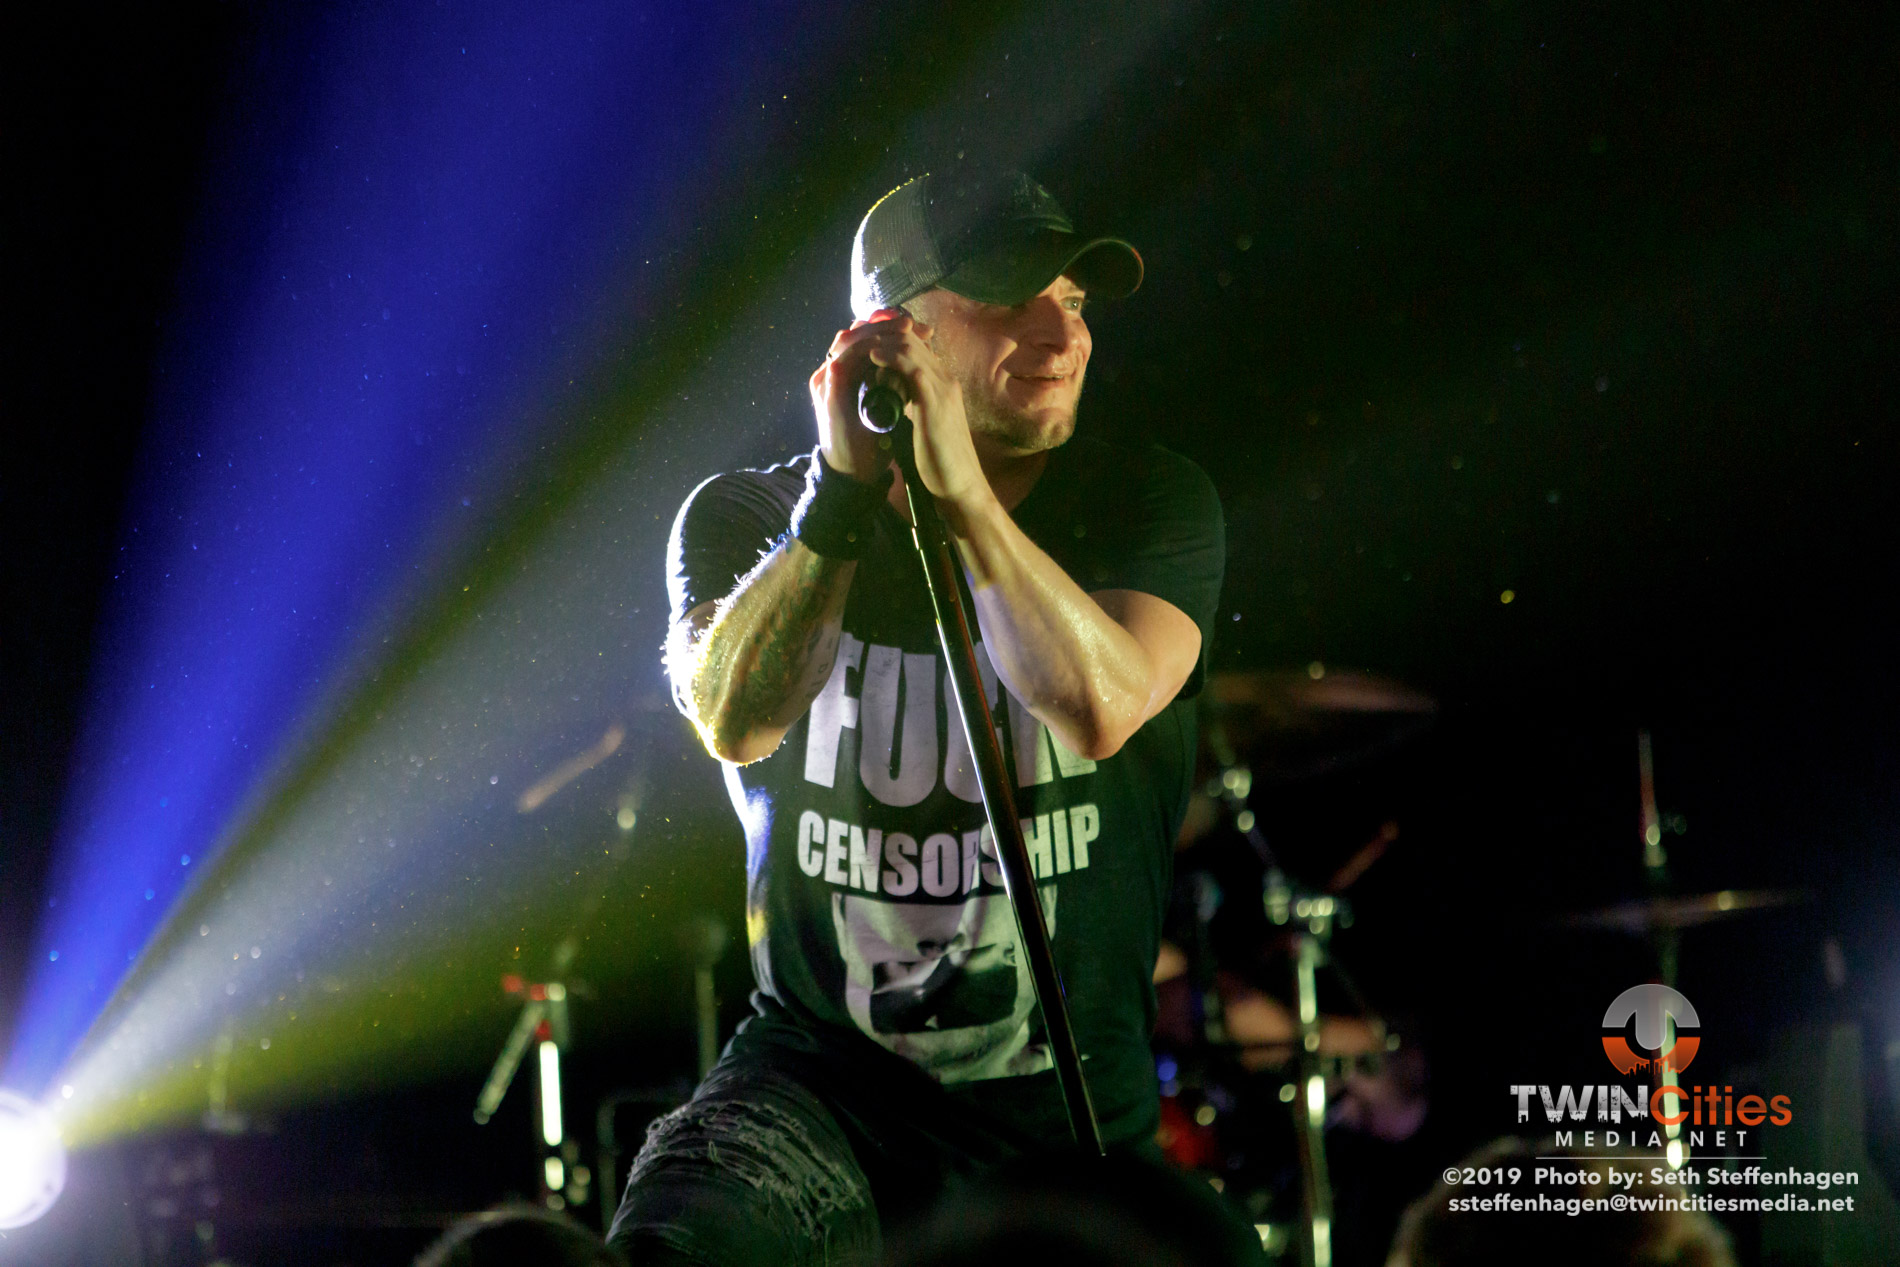 March 12, 2019 - Minneapolis, Minnesota, United States - All That Remains live in concert atThe Cabooze along with Atilla, Escape The Fate and Sleep Signals as the openers.

(Photo by Seth Steffenhagen/Steffenhagen Photography)